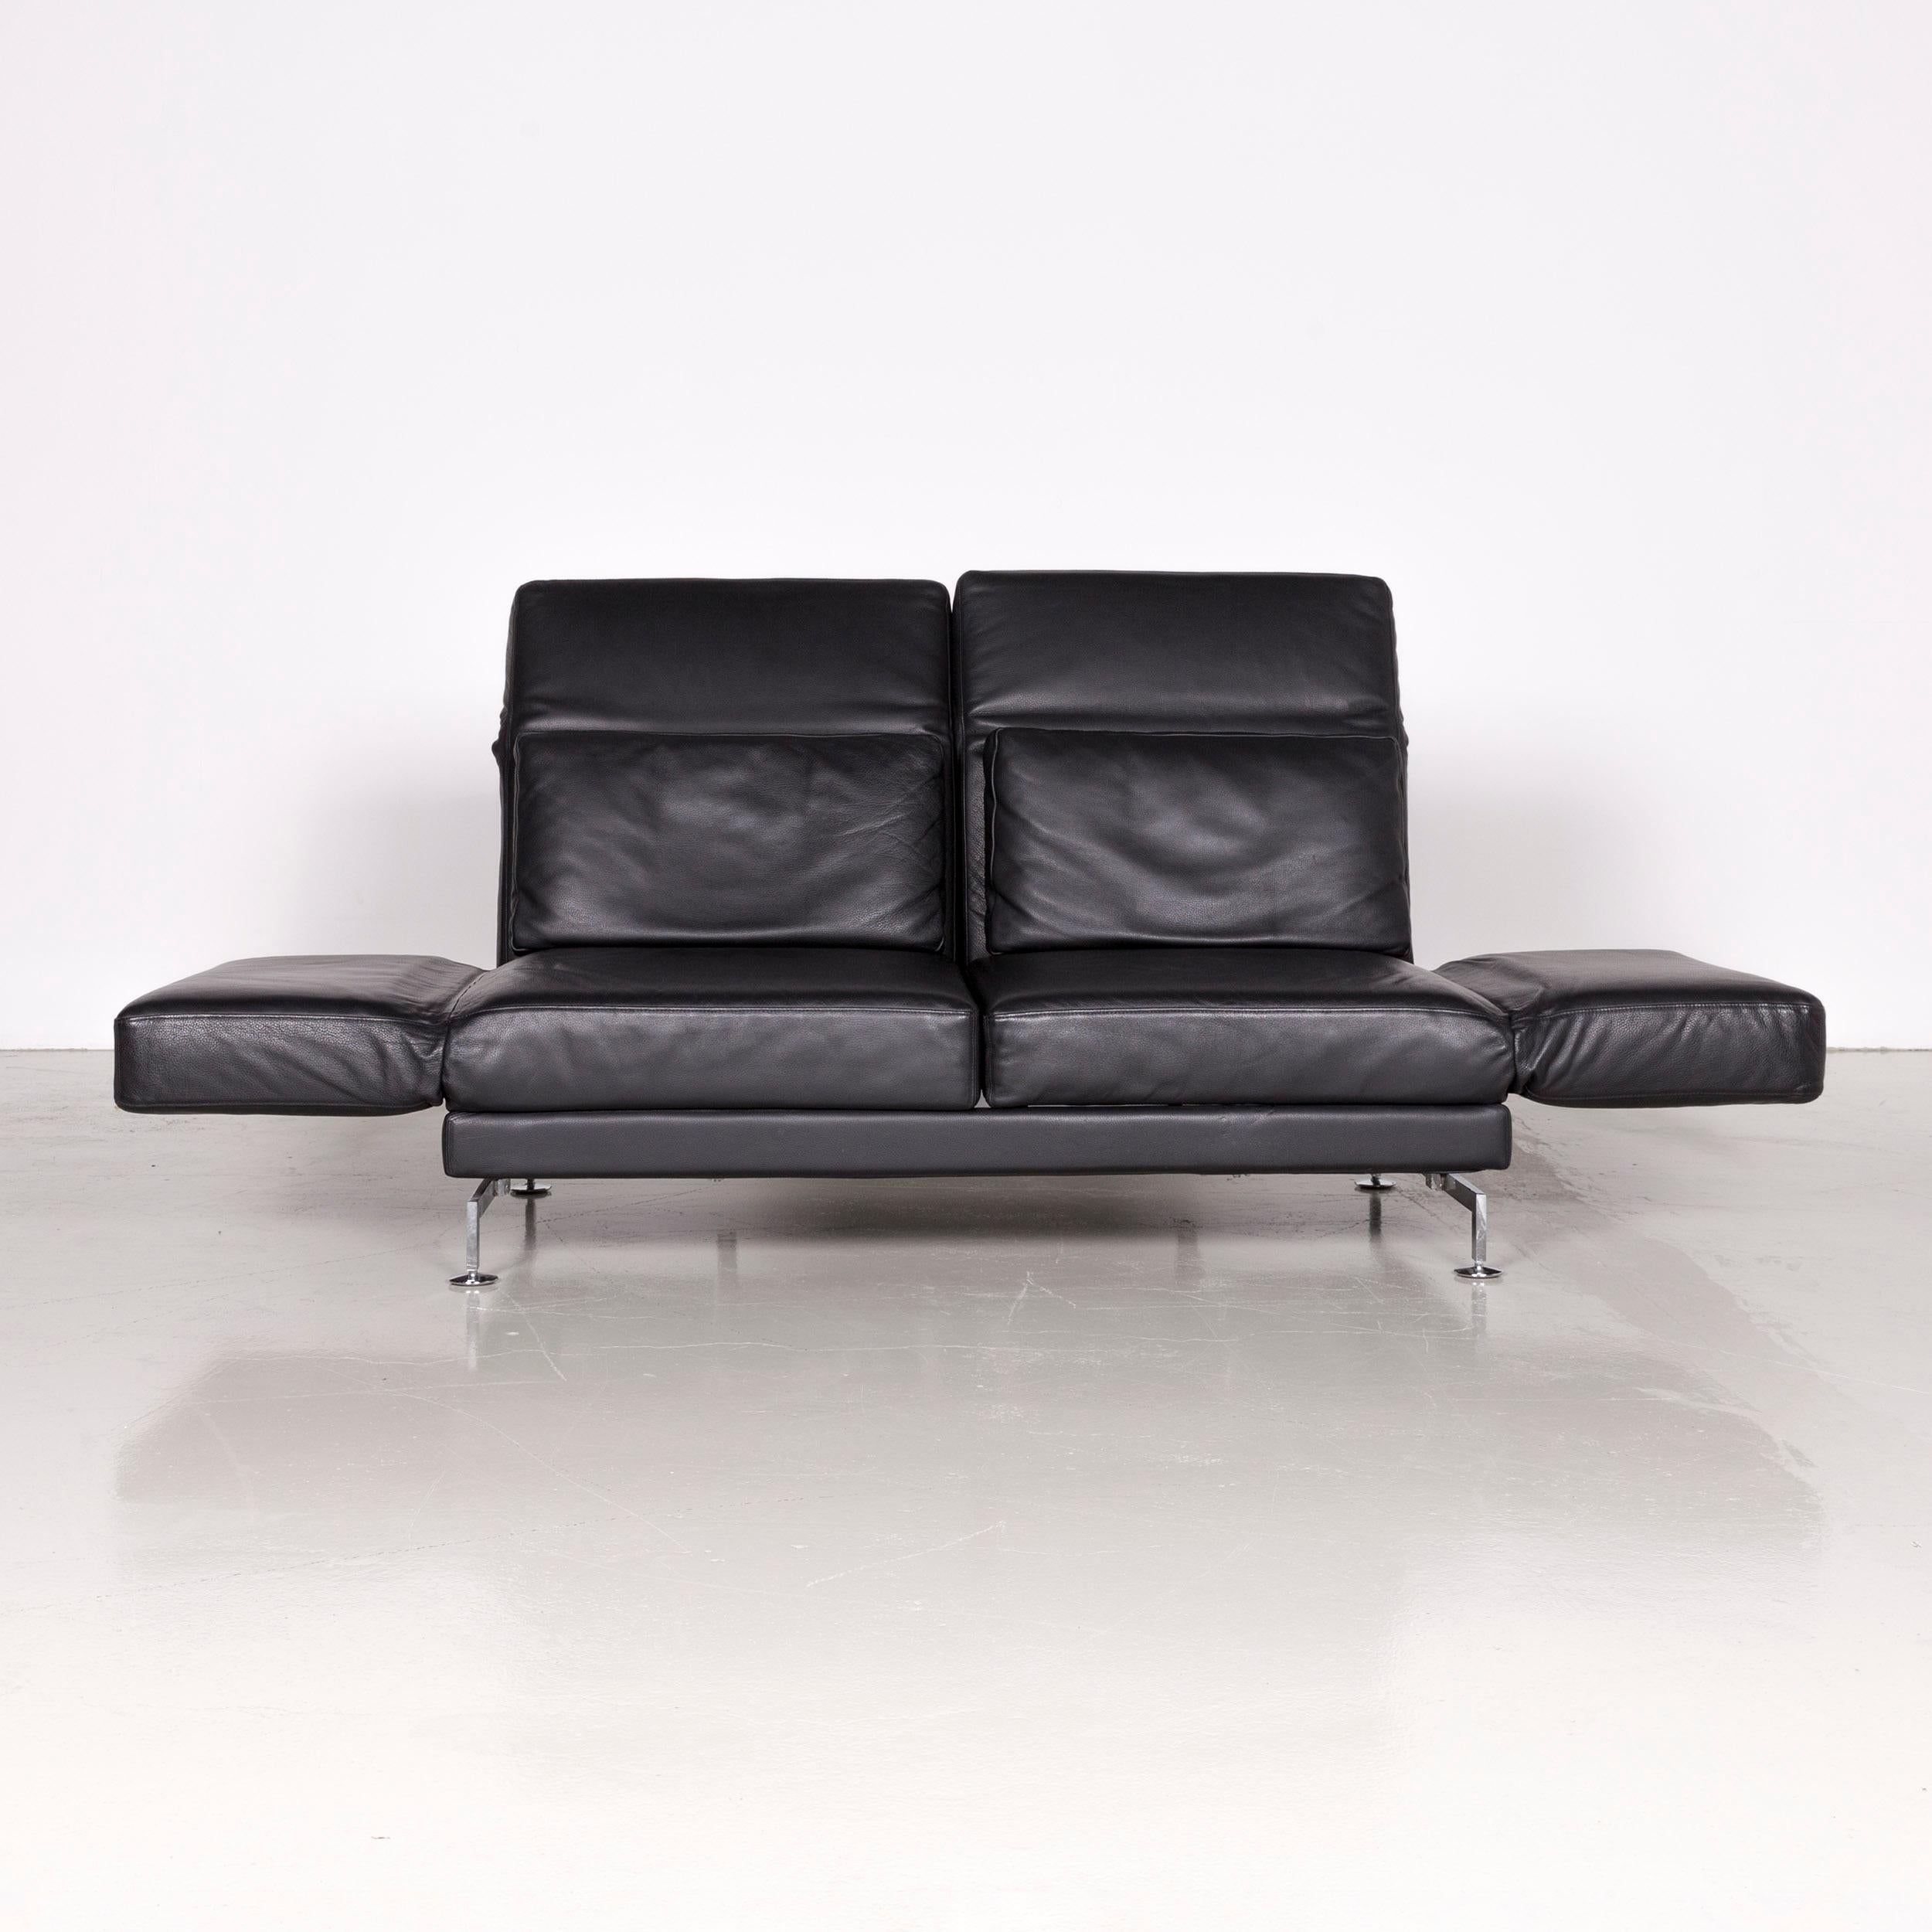 German Brühl & Sippold Moule Designer Leather Sofa Black Two-Seat Couch with Function